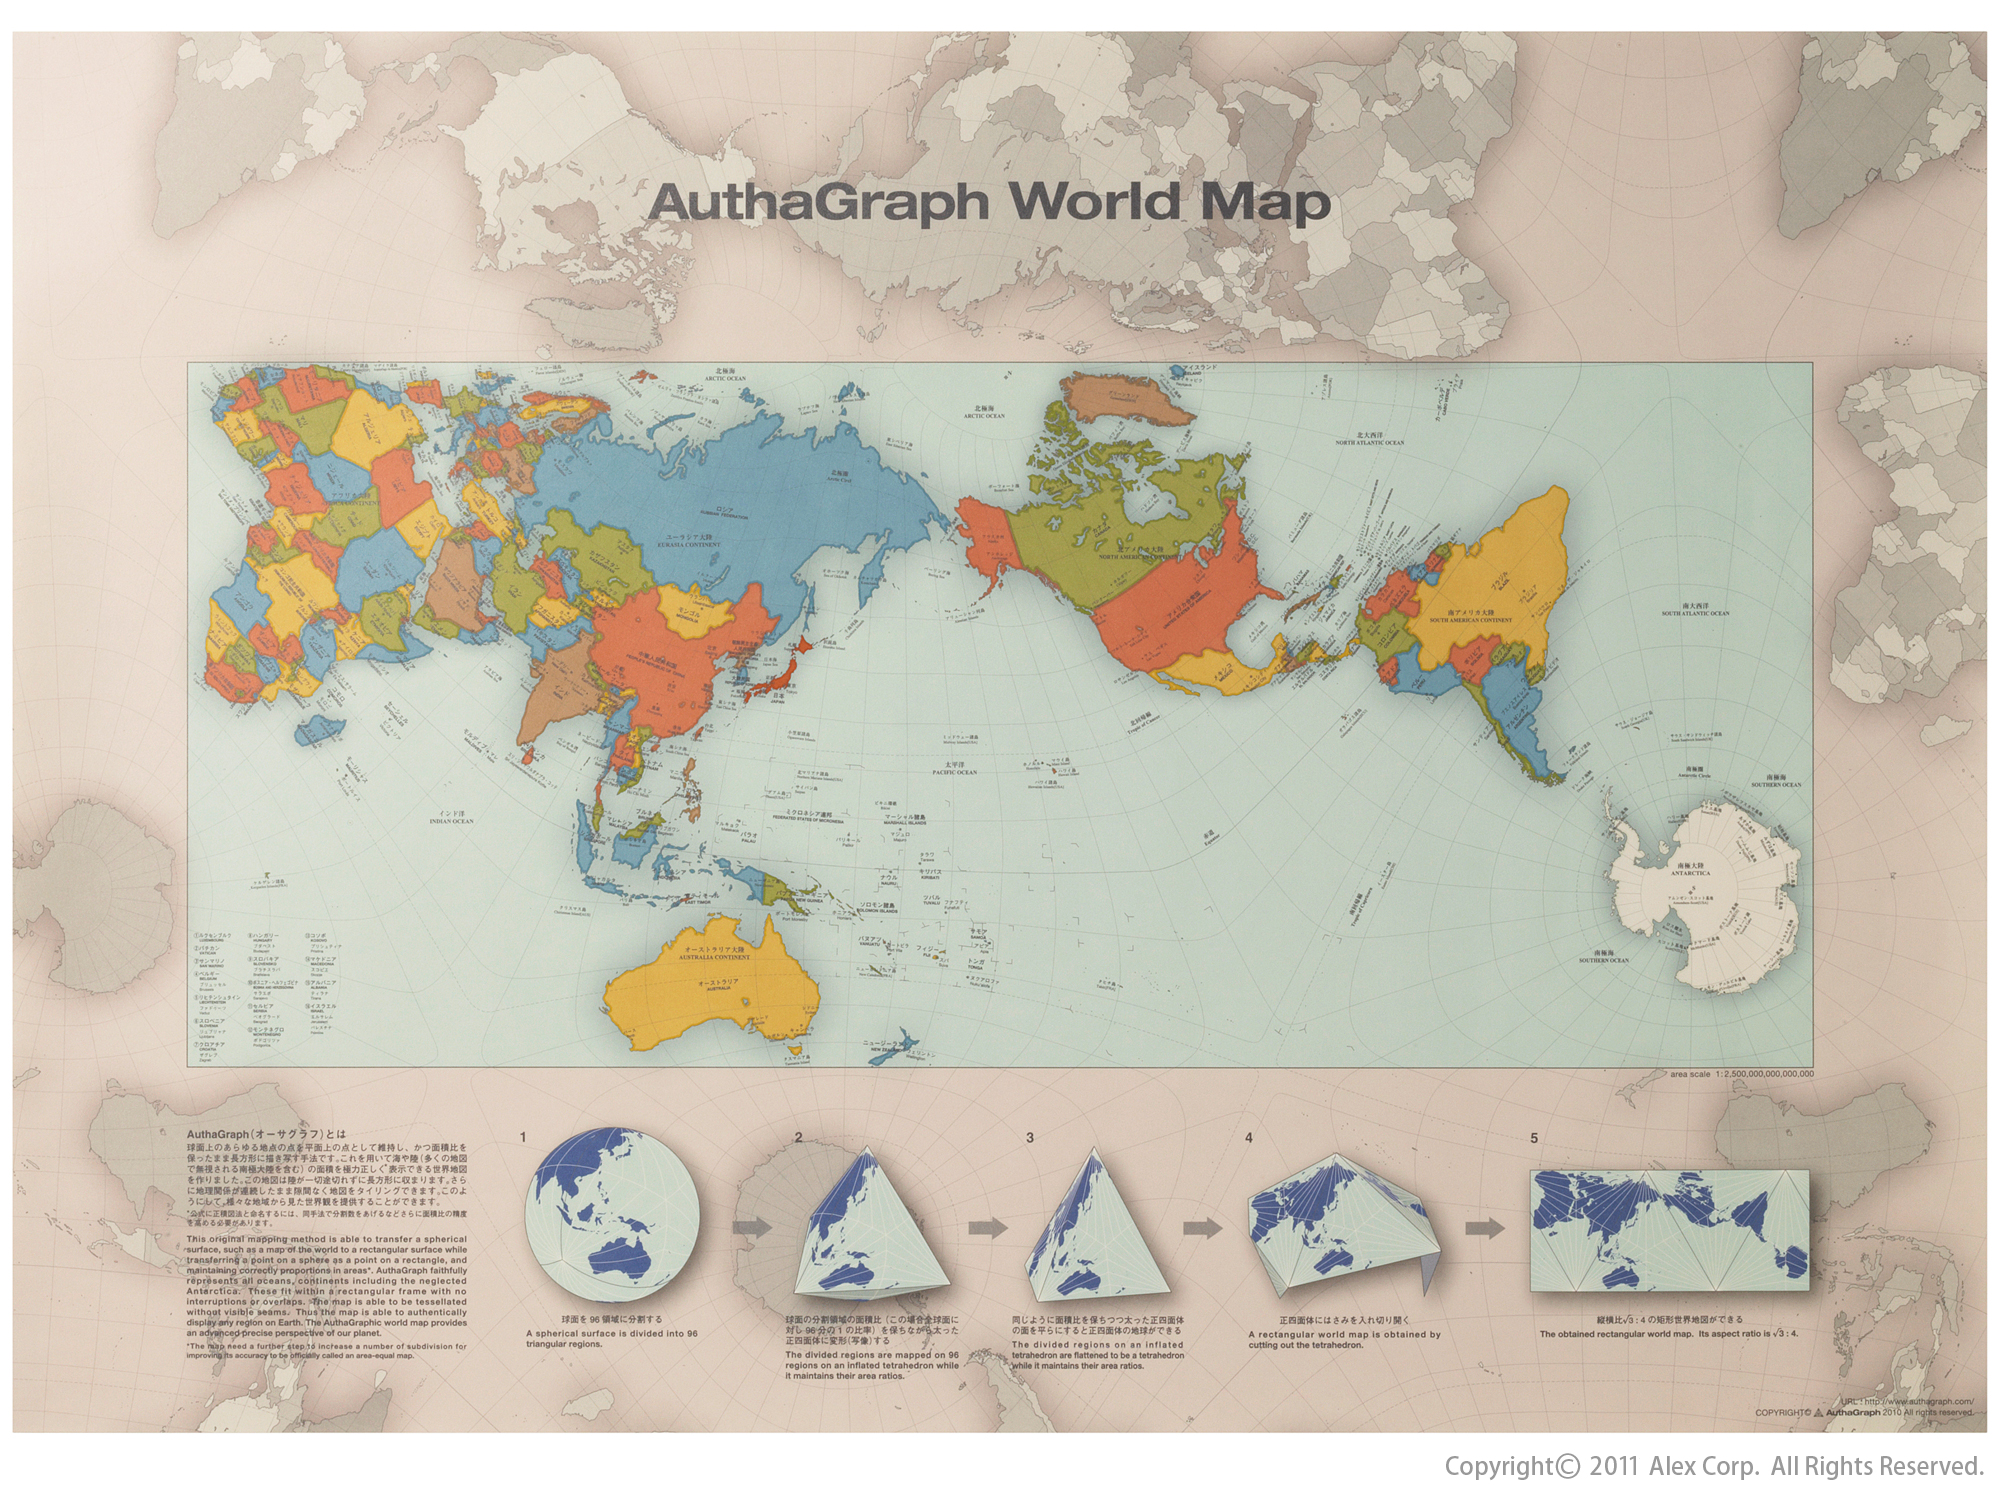 Authagraph World Map